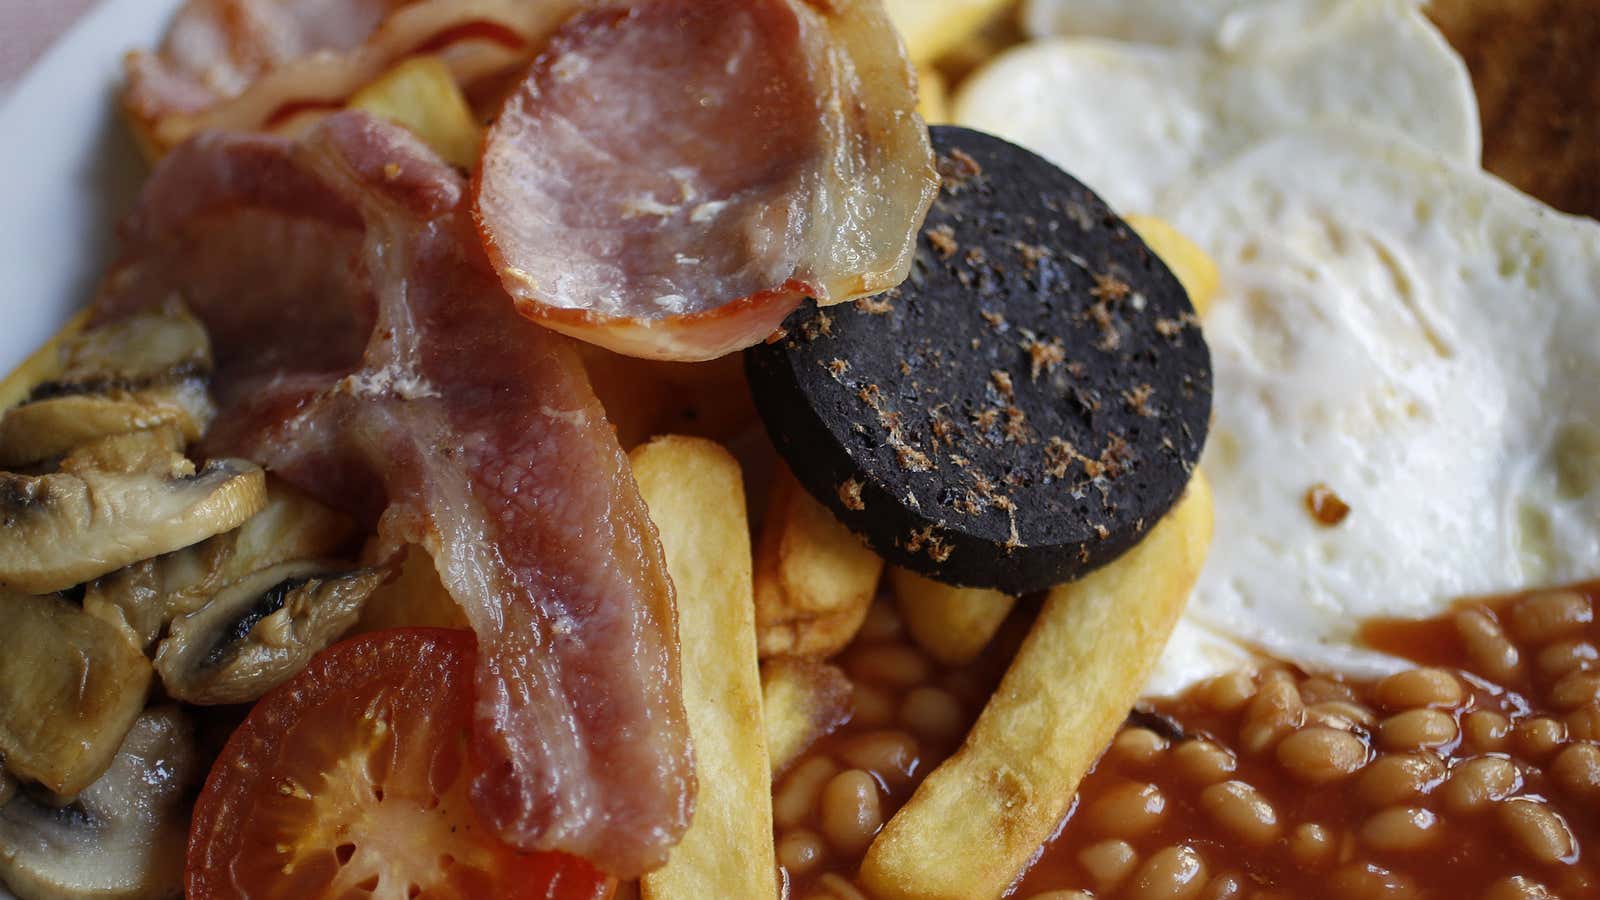 Soon bacon may be relegated to breakfast fare.